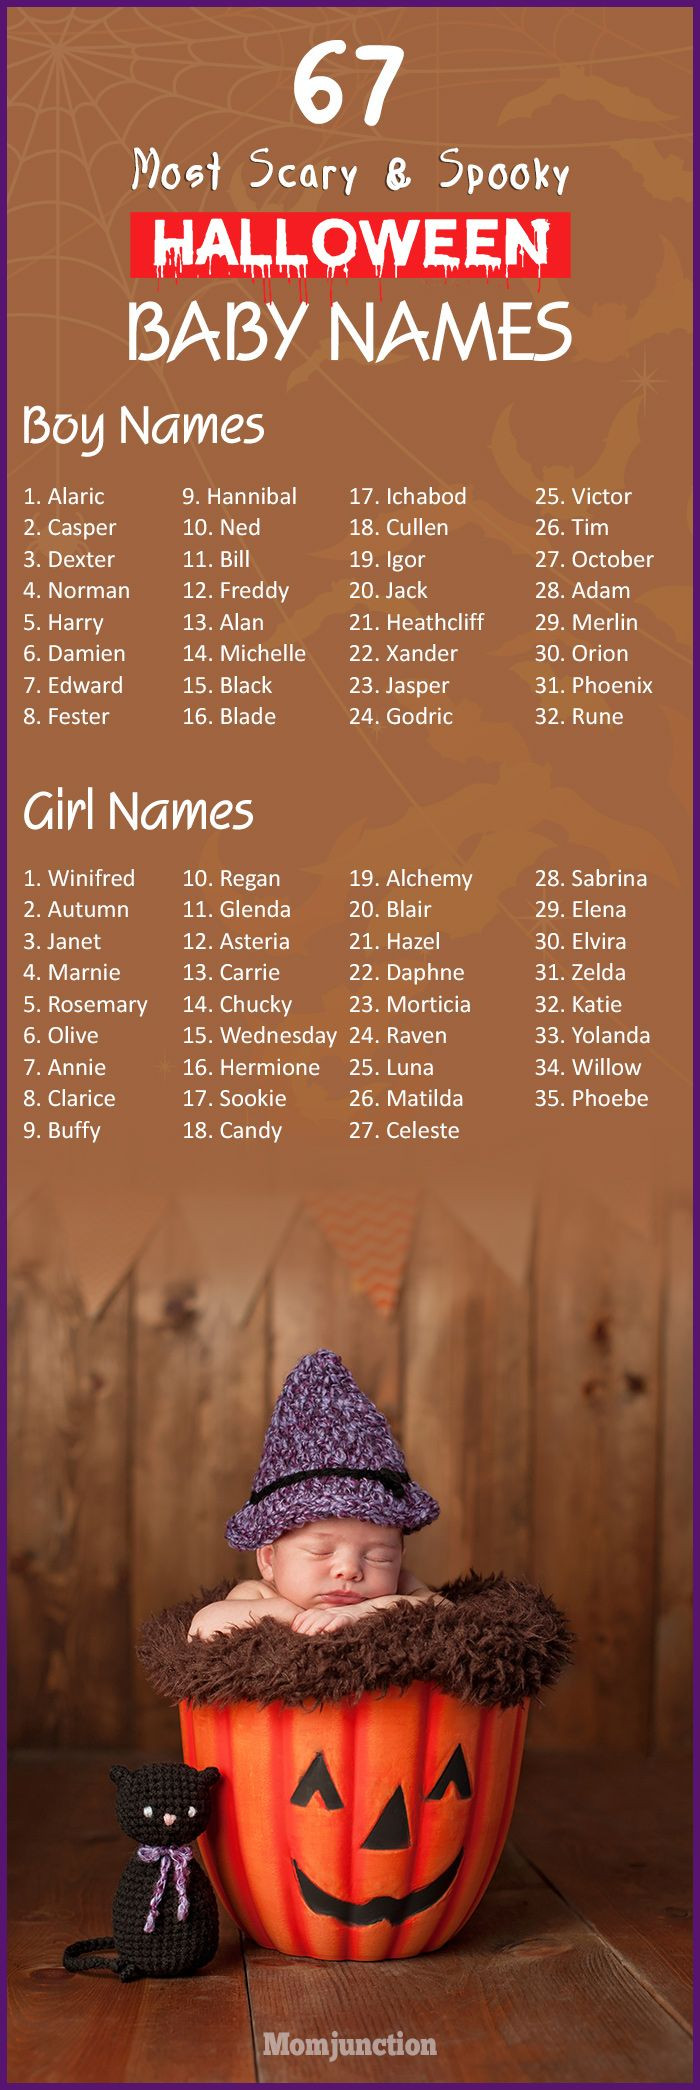 Halloween Party Names Ideas
 67 Most Scary And Spooky Halloween Names For Your Baby